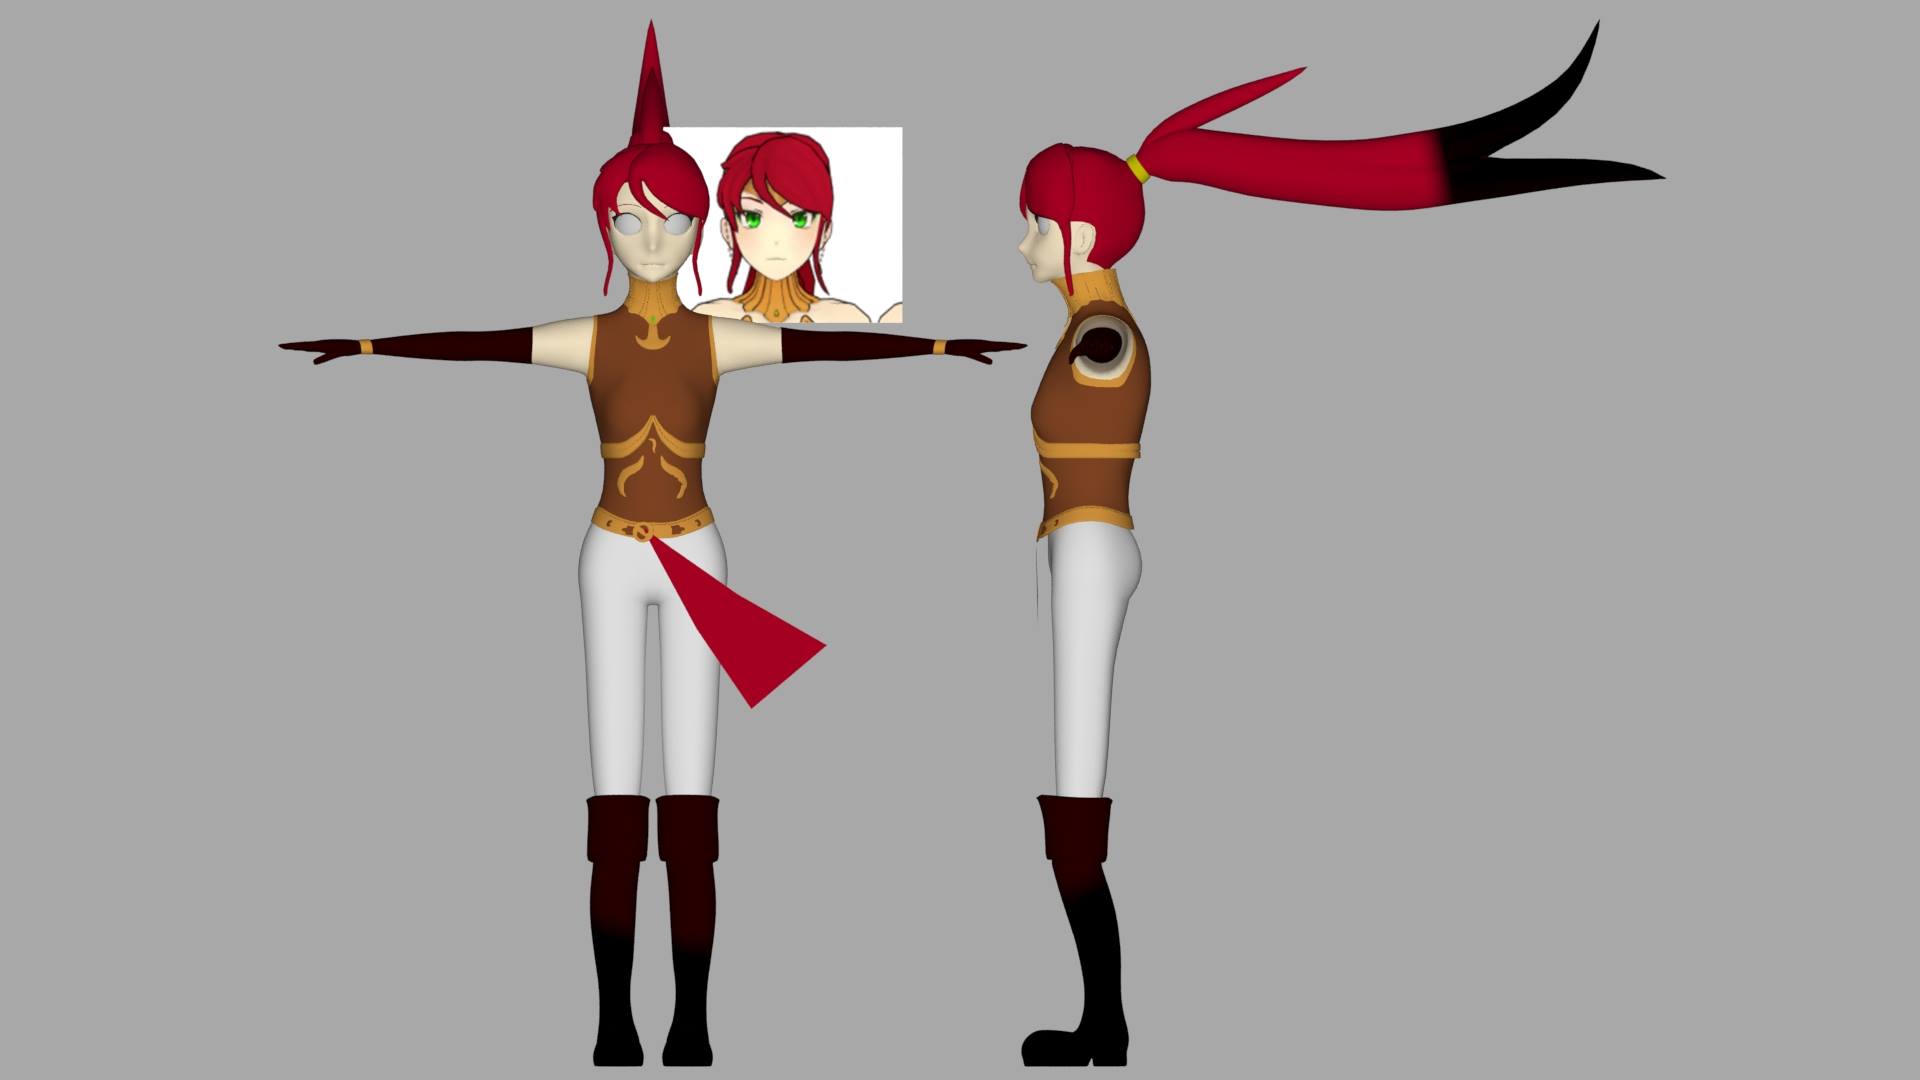 Rwby Over The Seas Fan Project Help Wanted Volunteer Work Blender Artists Community